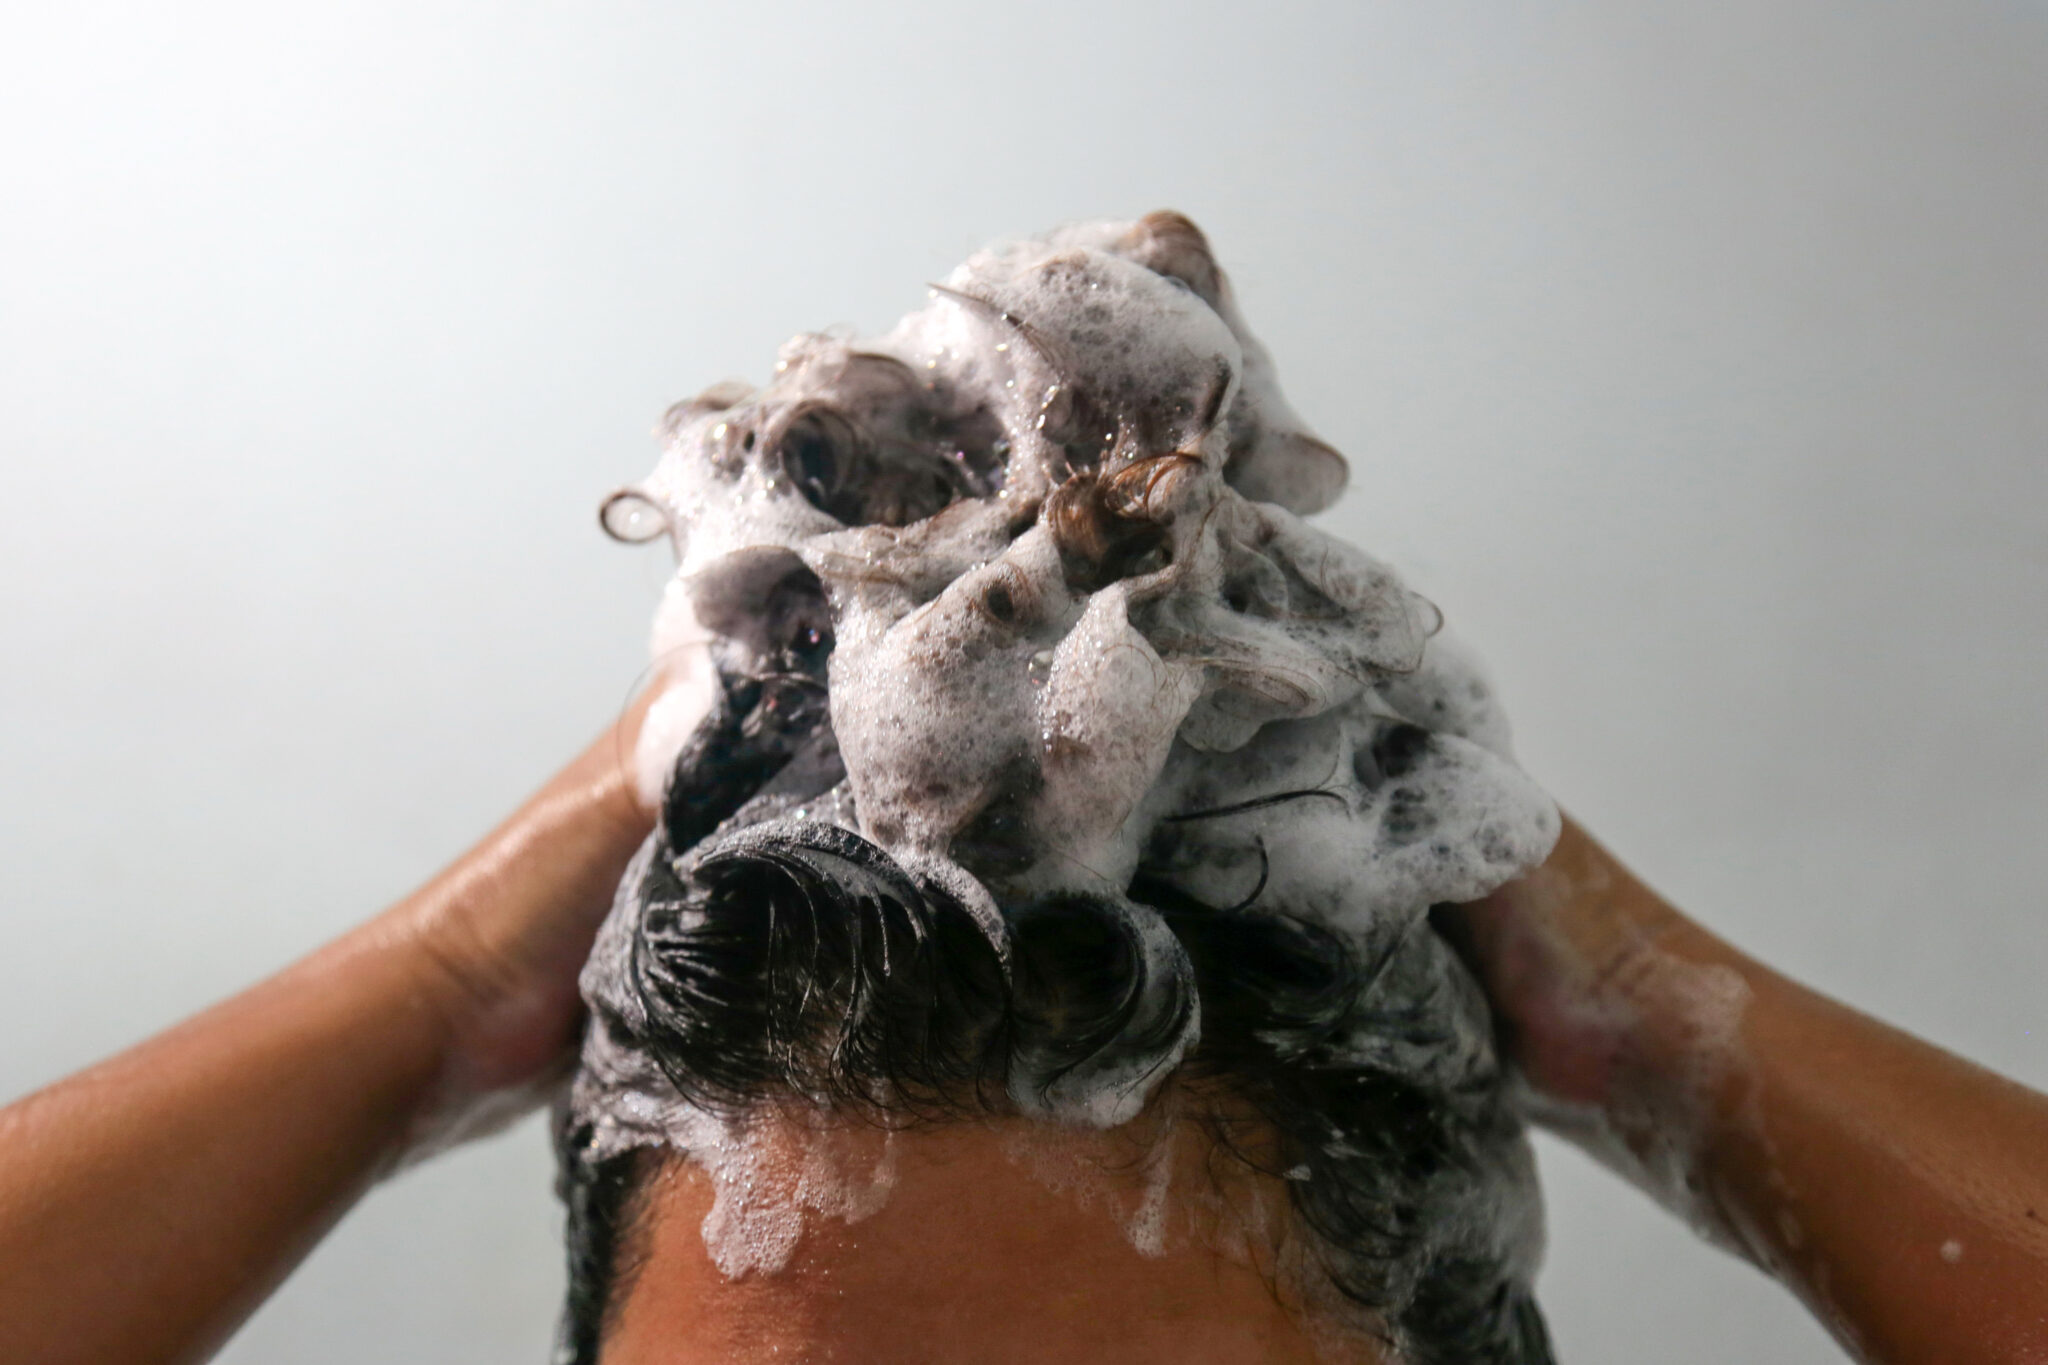 Is Silicone Bad for Hair and Health? The Effects of Silicone on Each Hair Type